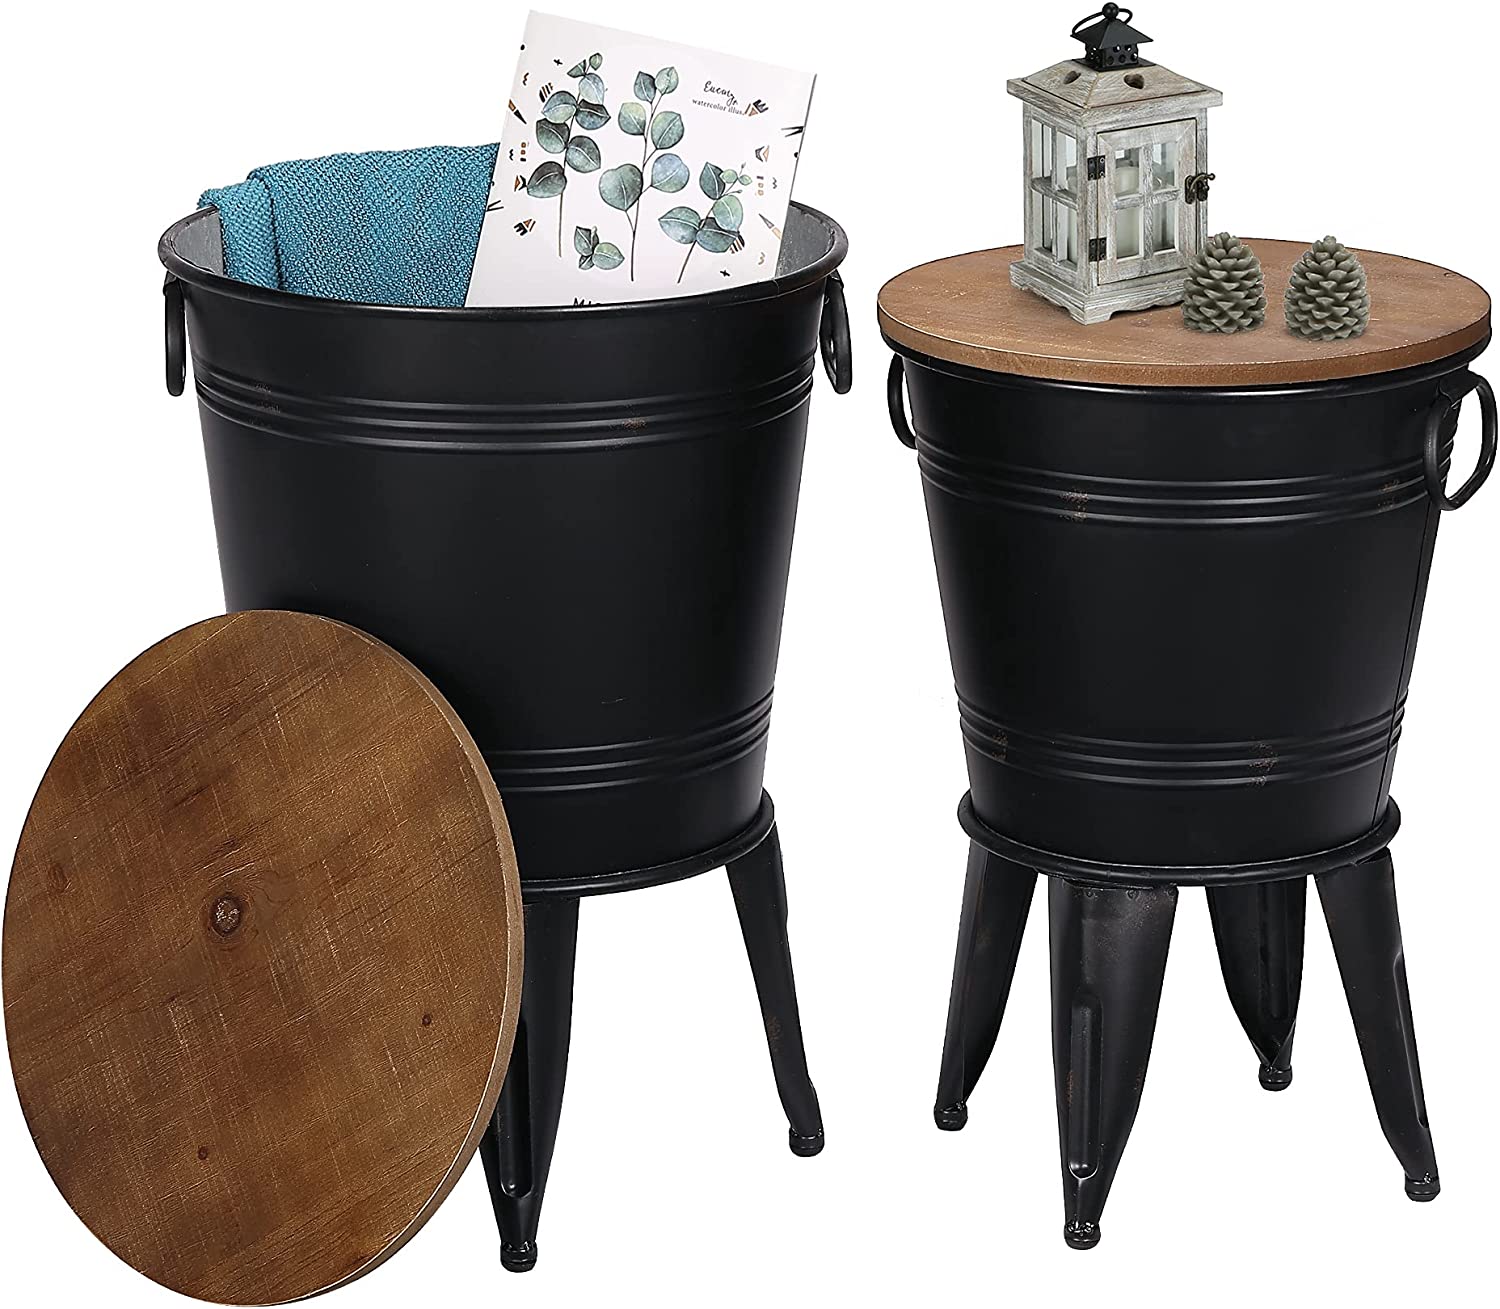 RUSTOWN Farmhouse Accent Side Table, Rustic Antique Galvanized End Coffee or Cocktail Table, Storage Metal Bin with Round Wood Lid Set of 2 (Black)